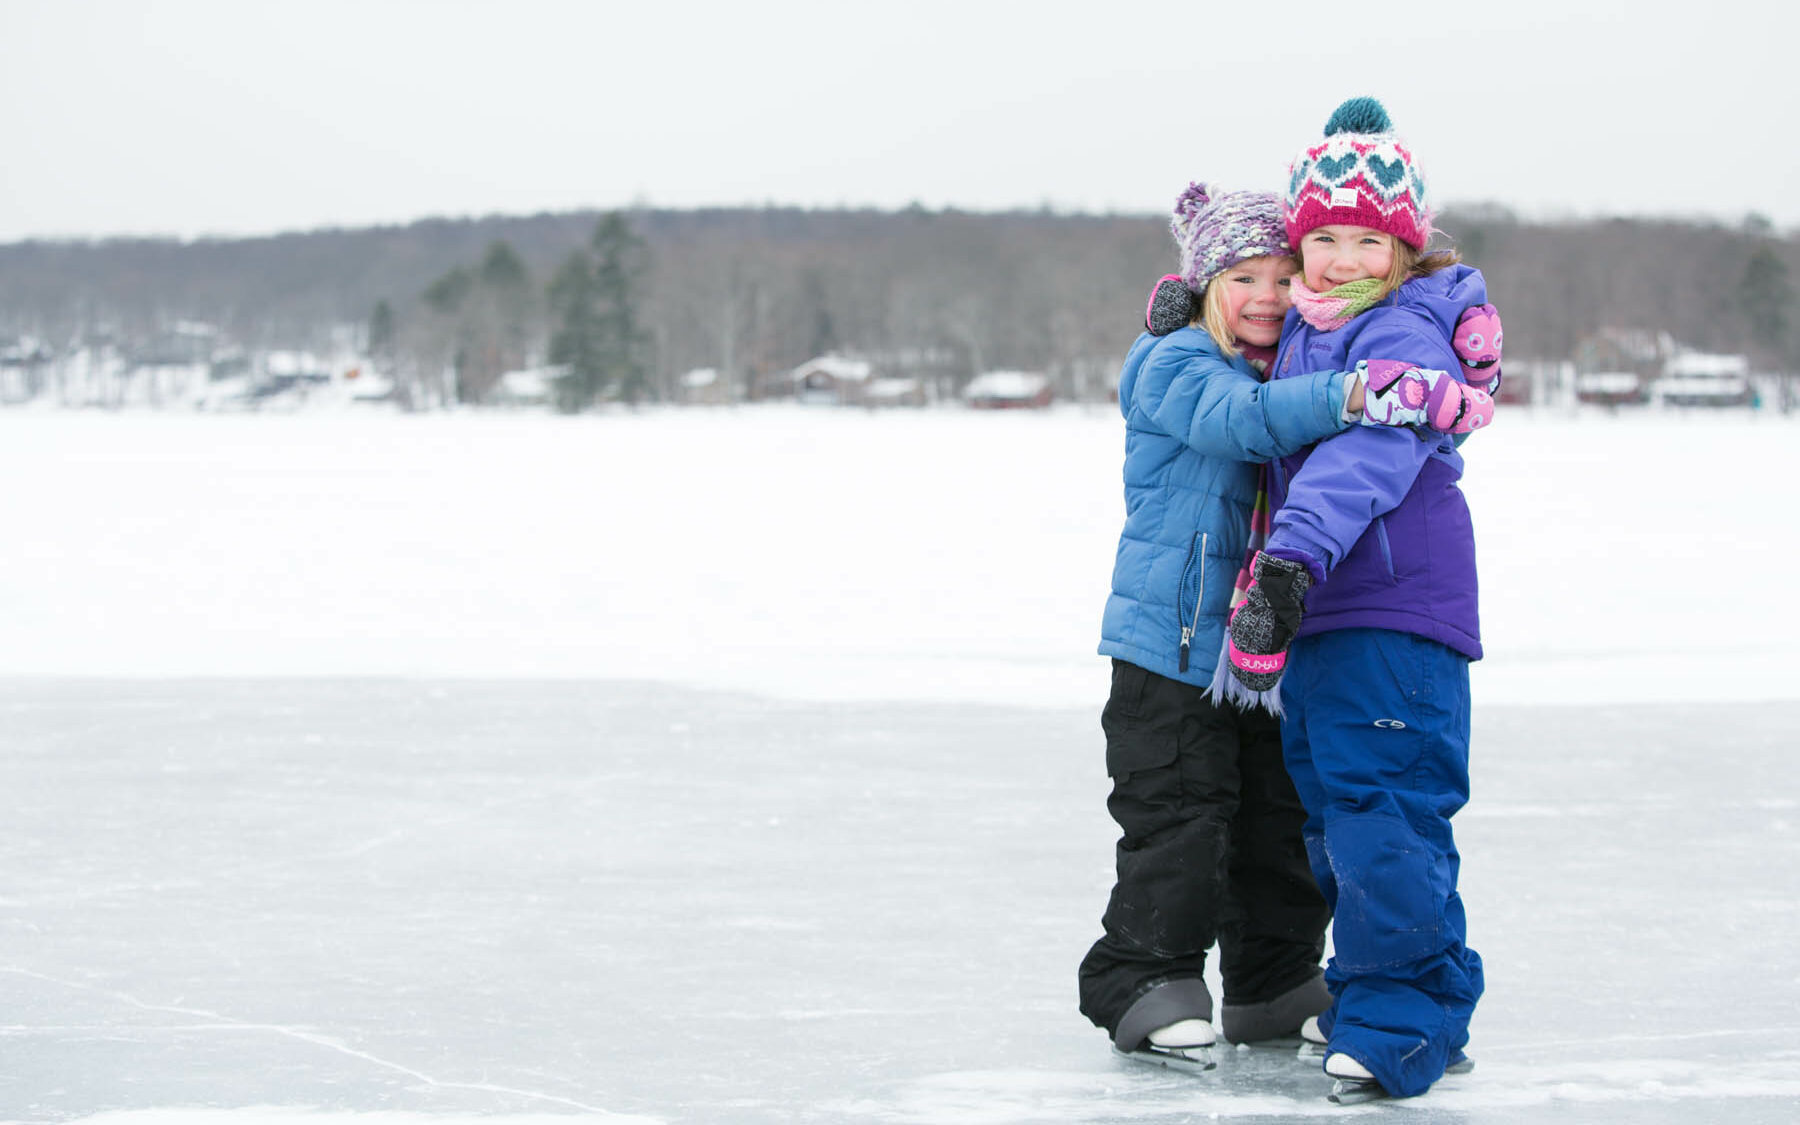 Two young girls in snow suits and ice skates hugging on Lake Teedyuskung in winter.